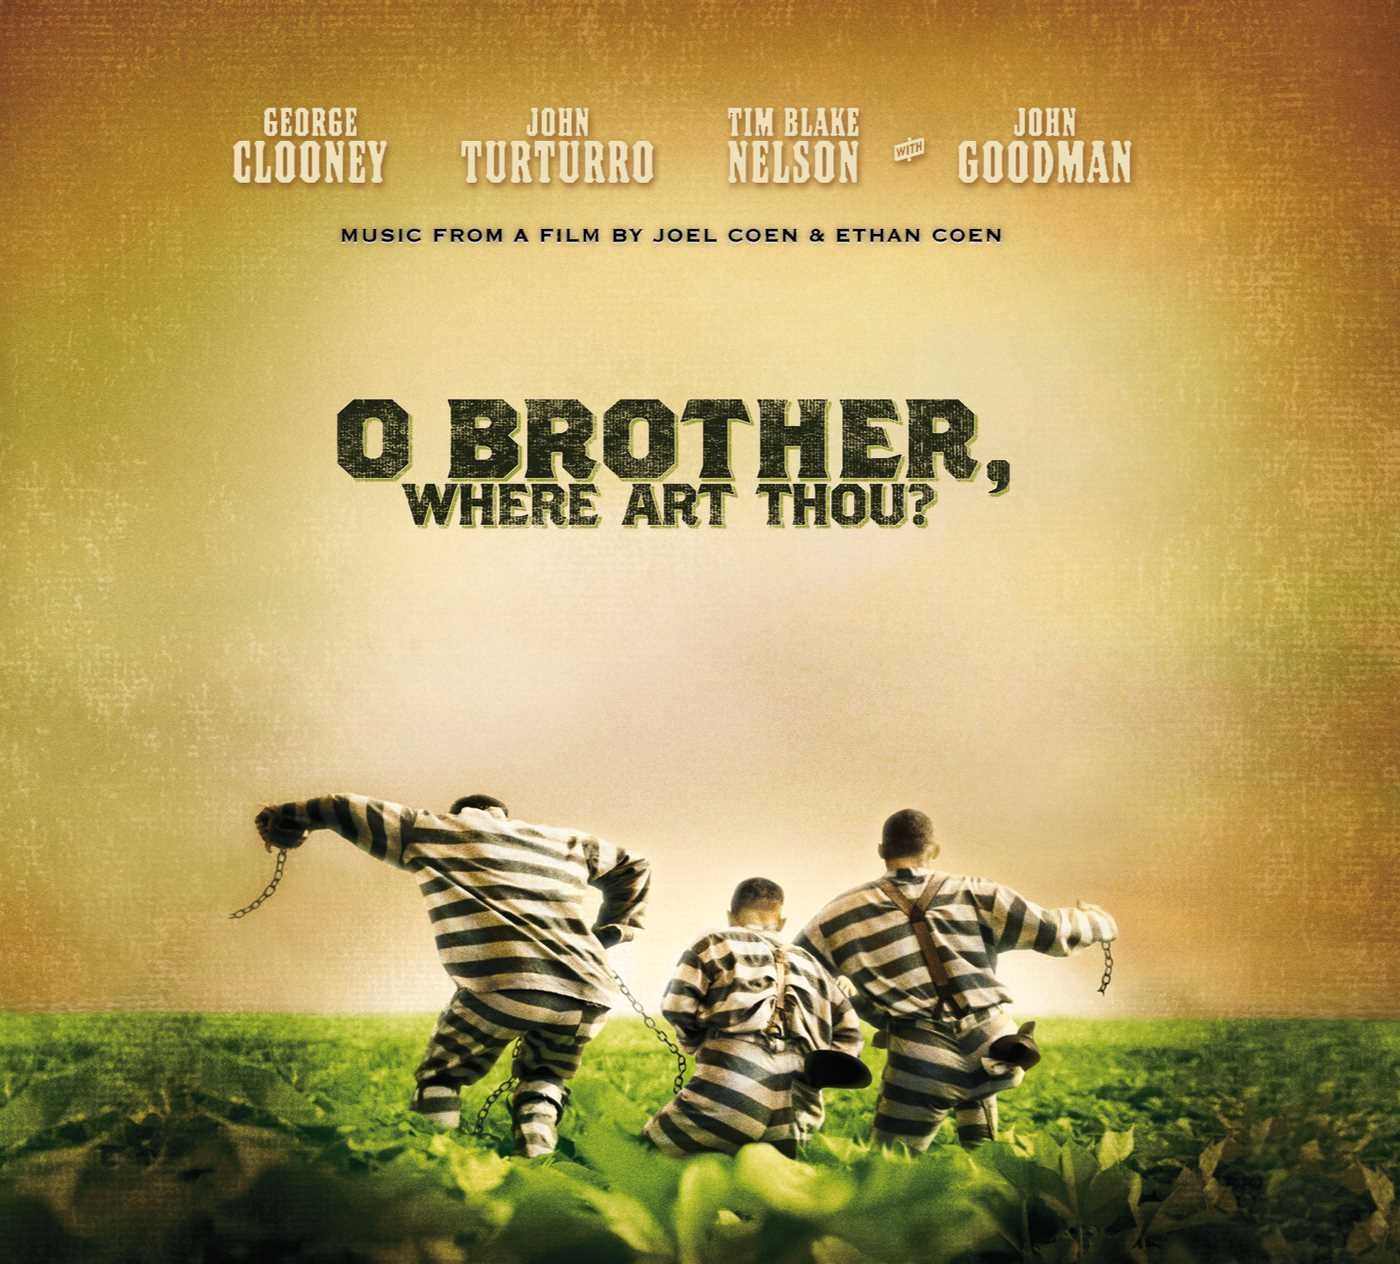 VA - O Brother, Where Art Thou? Original Motion Picture Soundtrack (2000/2014) [AcousticSounds DSF DSD64/2.82MHz]